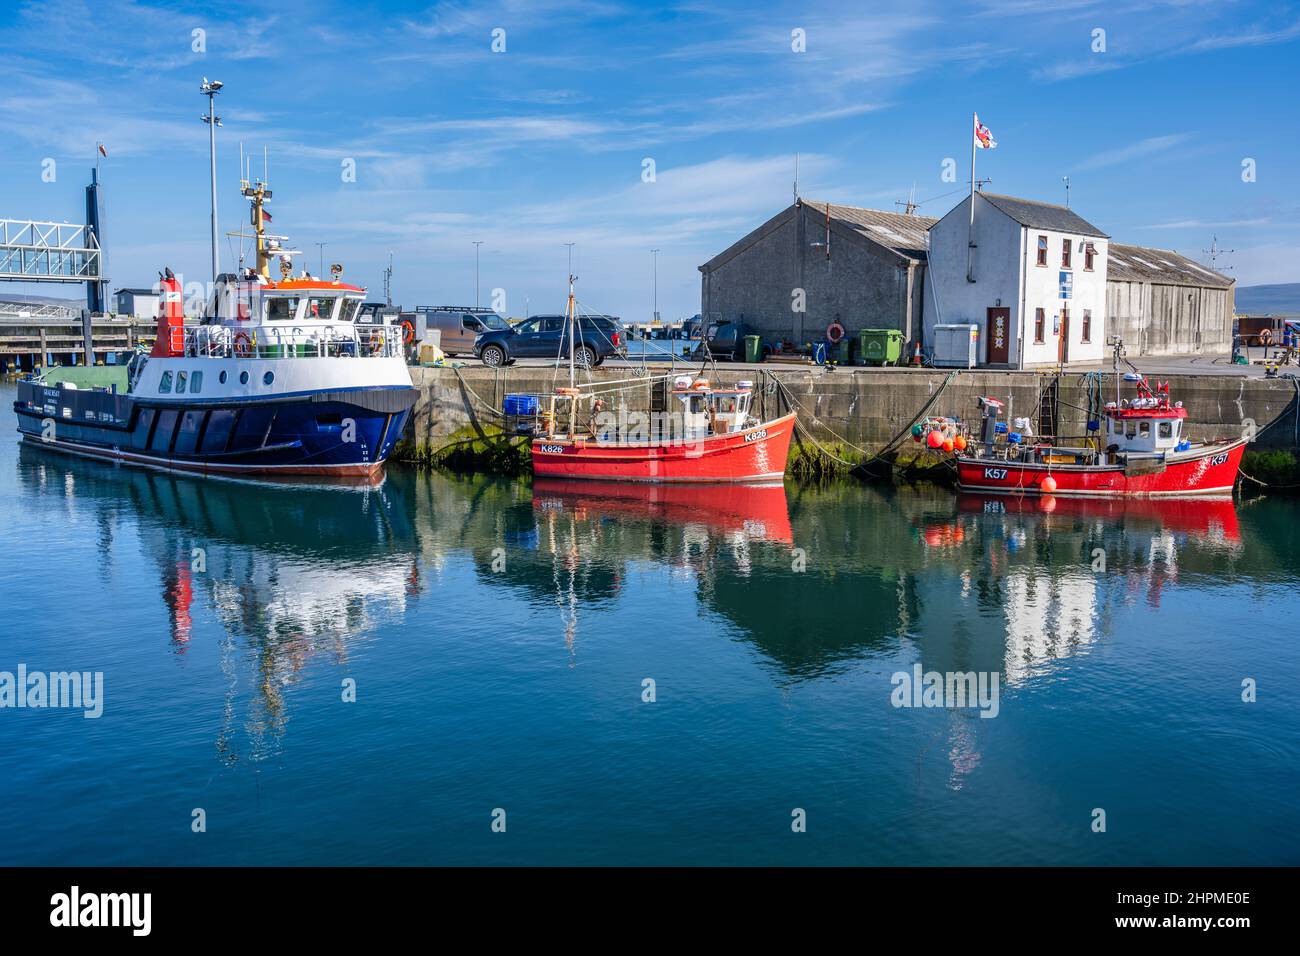 Graemsay and North Hoy Ferry, plus two fishing boats, tied up on quayside at Stromness harbour – Stromness, Mainland Orkney, Scotland, UK Stock Photo